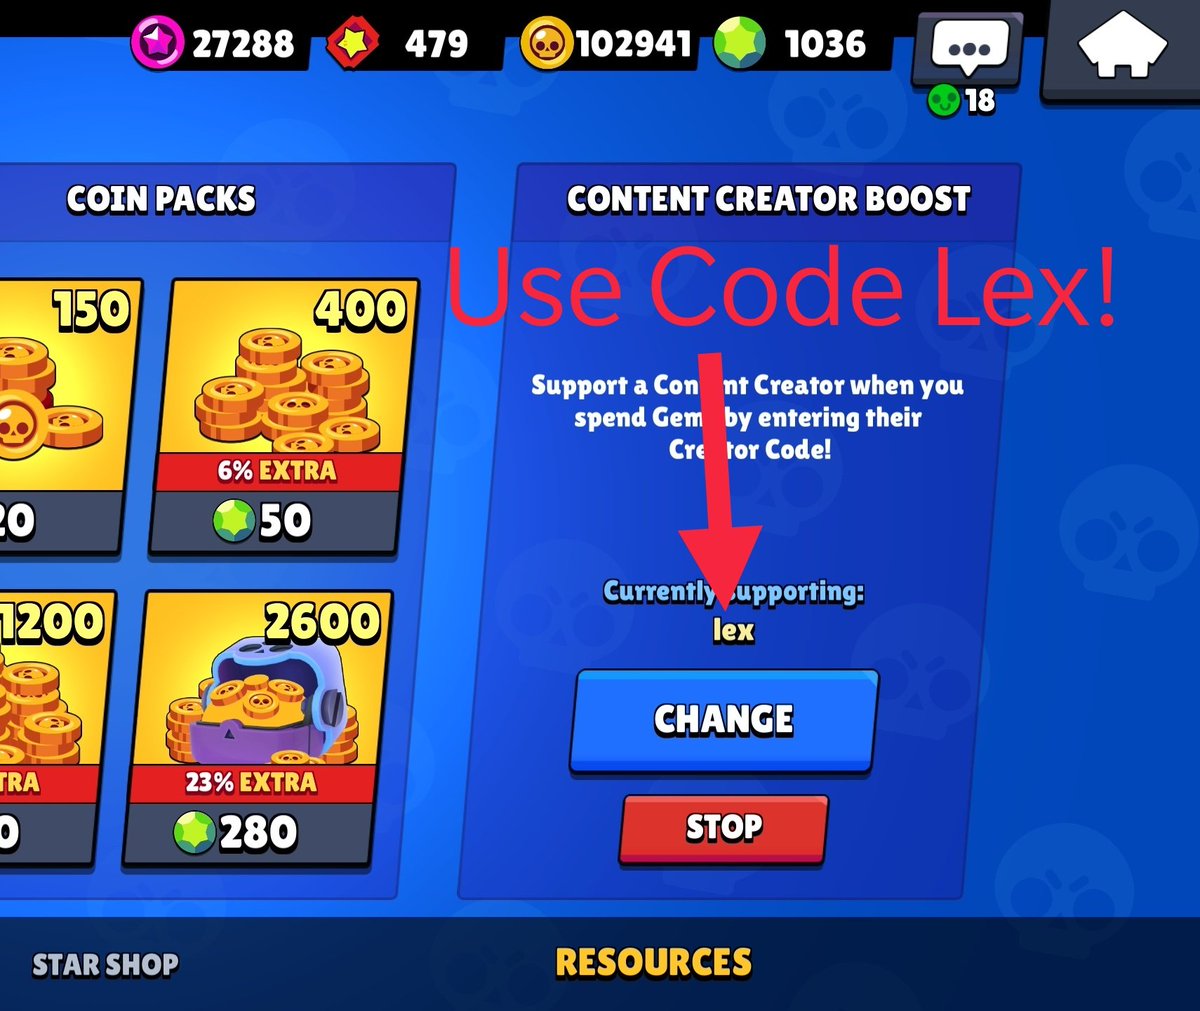 Lex On Twitter Use Code Lex Creator Codes Back In Brawlstars Just Scroll To The Right In The Shop Enter Lex And You Re Garunteed Free Legendary Brawlers So That Last Part Isn T